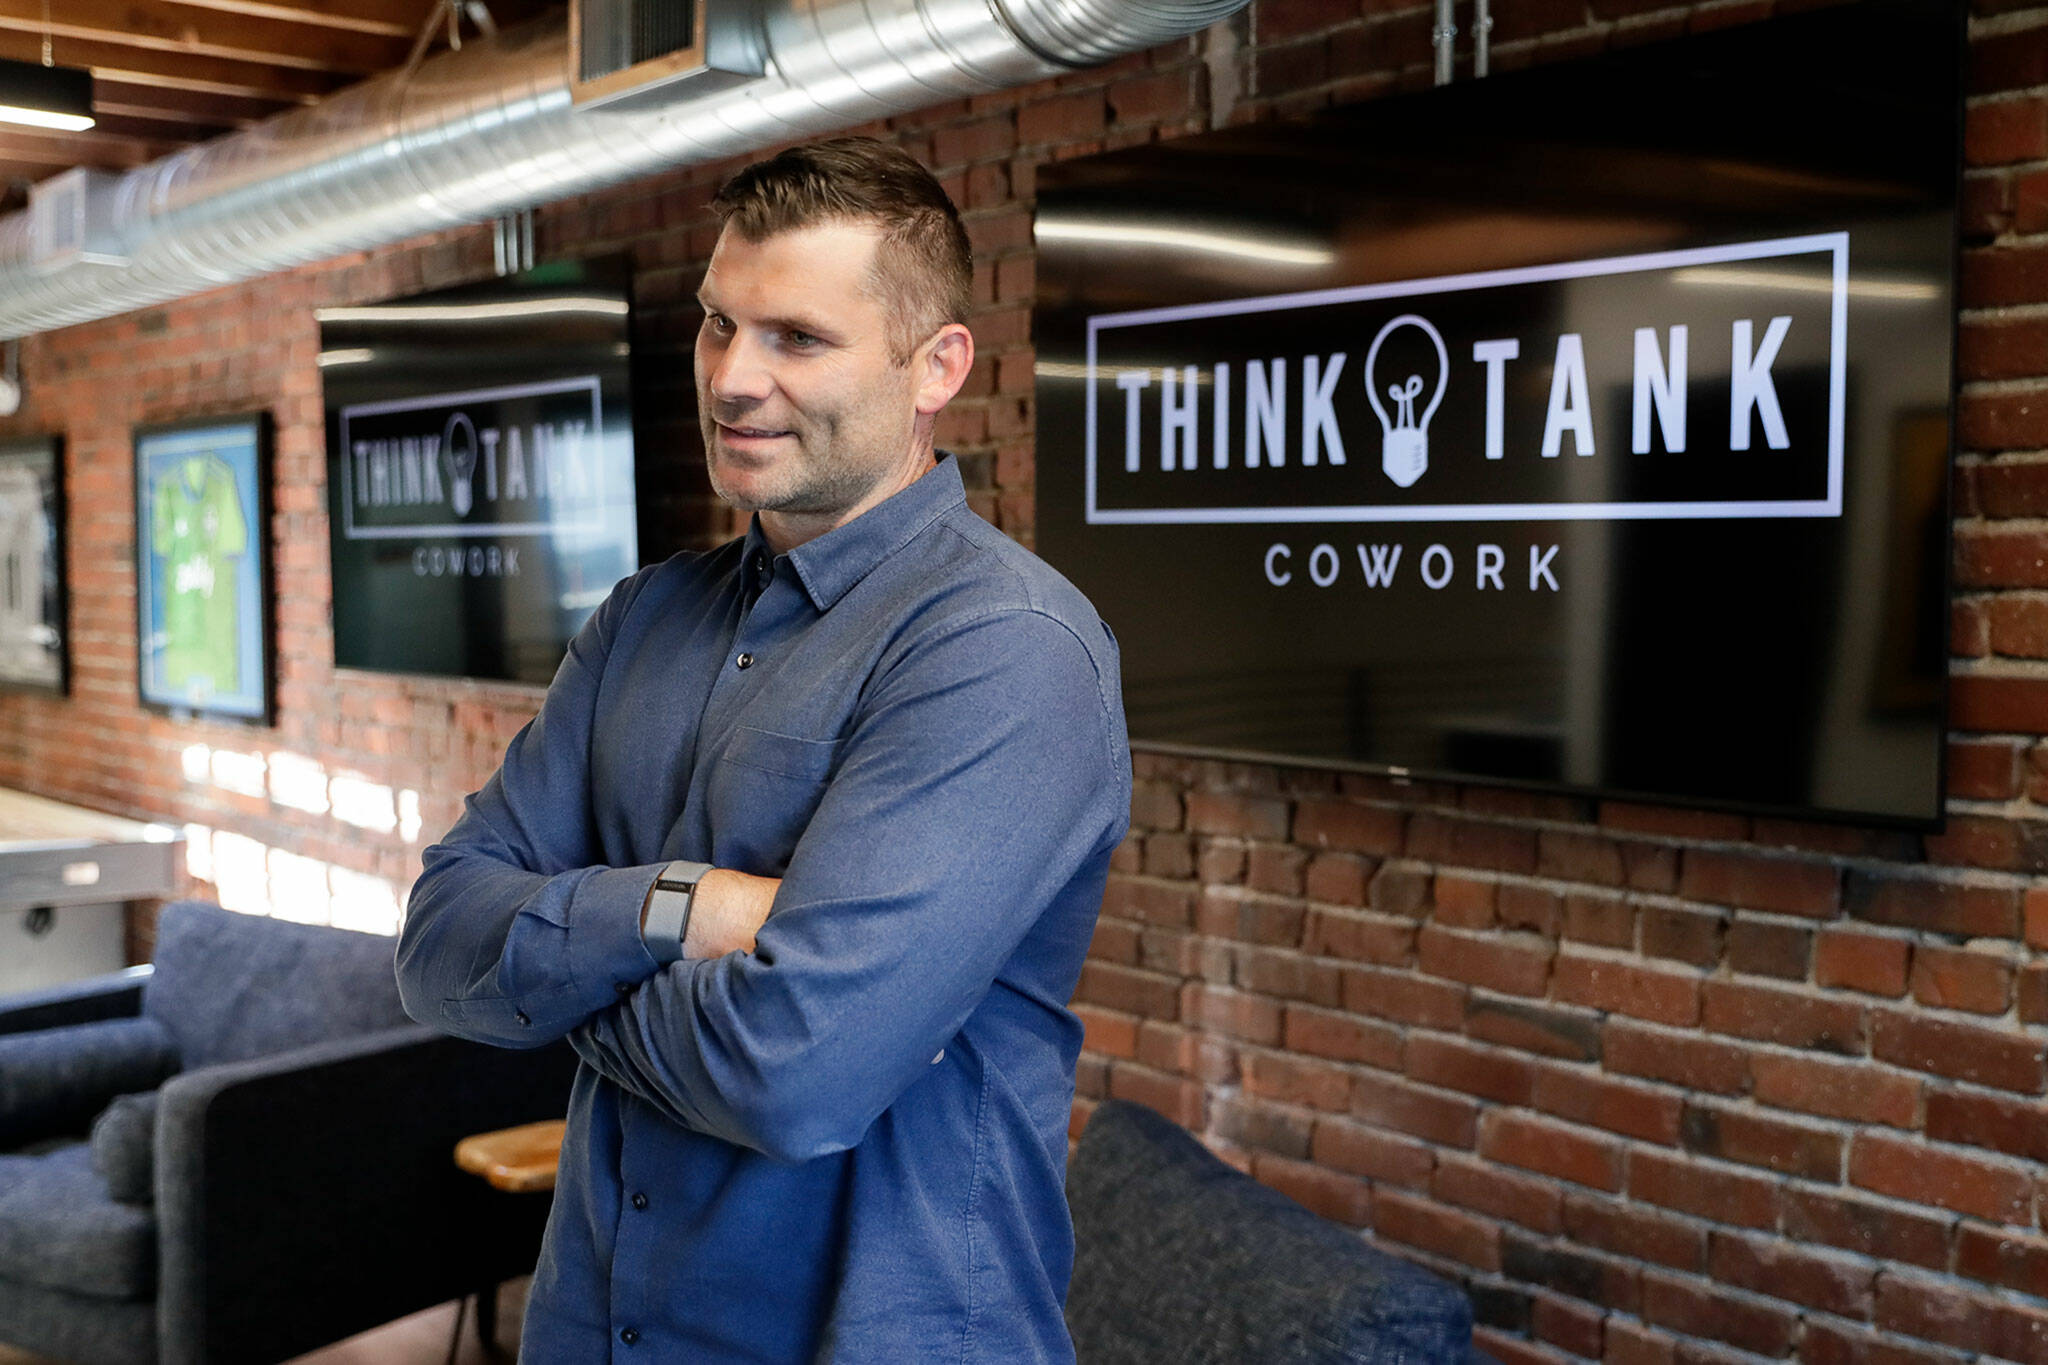 Shane Kidwell, CEO and founder, of Think Tank Cowork on Tuesday afternoon in Everett, Washington on July 19, 2022. (Kevin Clark / The Herald)